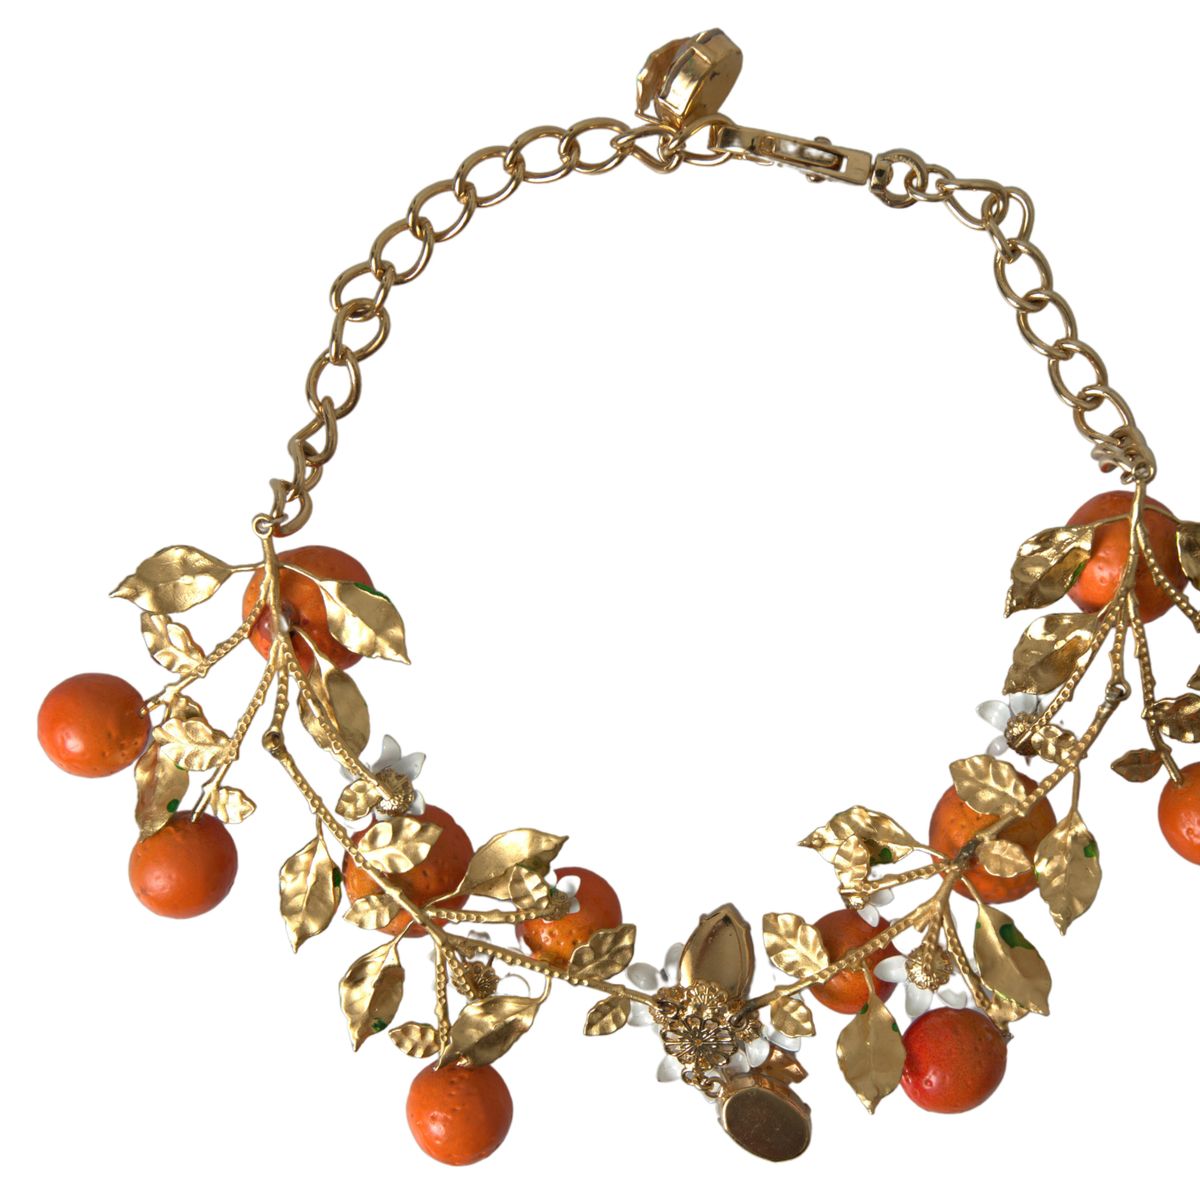 Dolce & Gabbana Multicolor Charm Necklace with Lobster Clasp